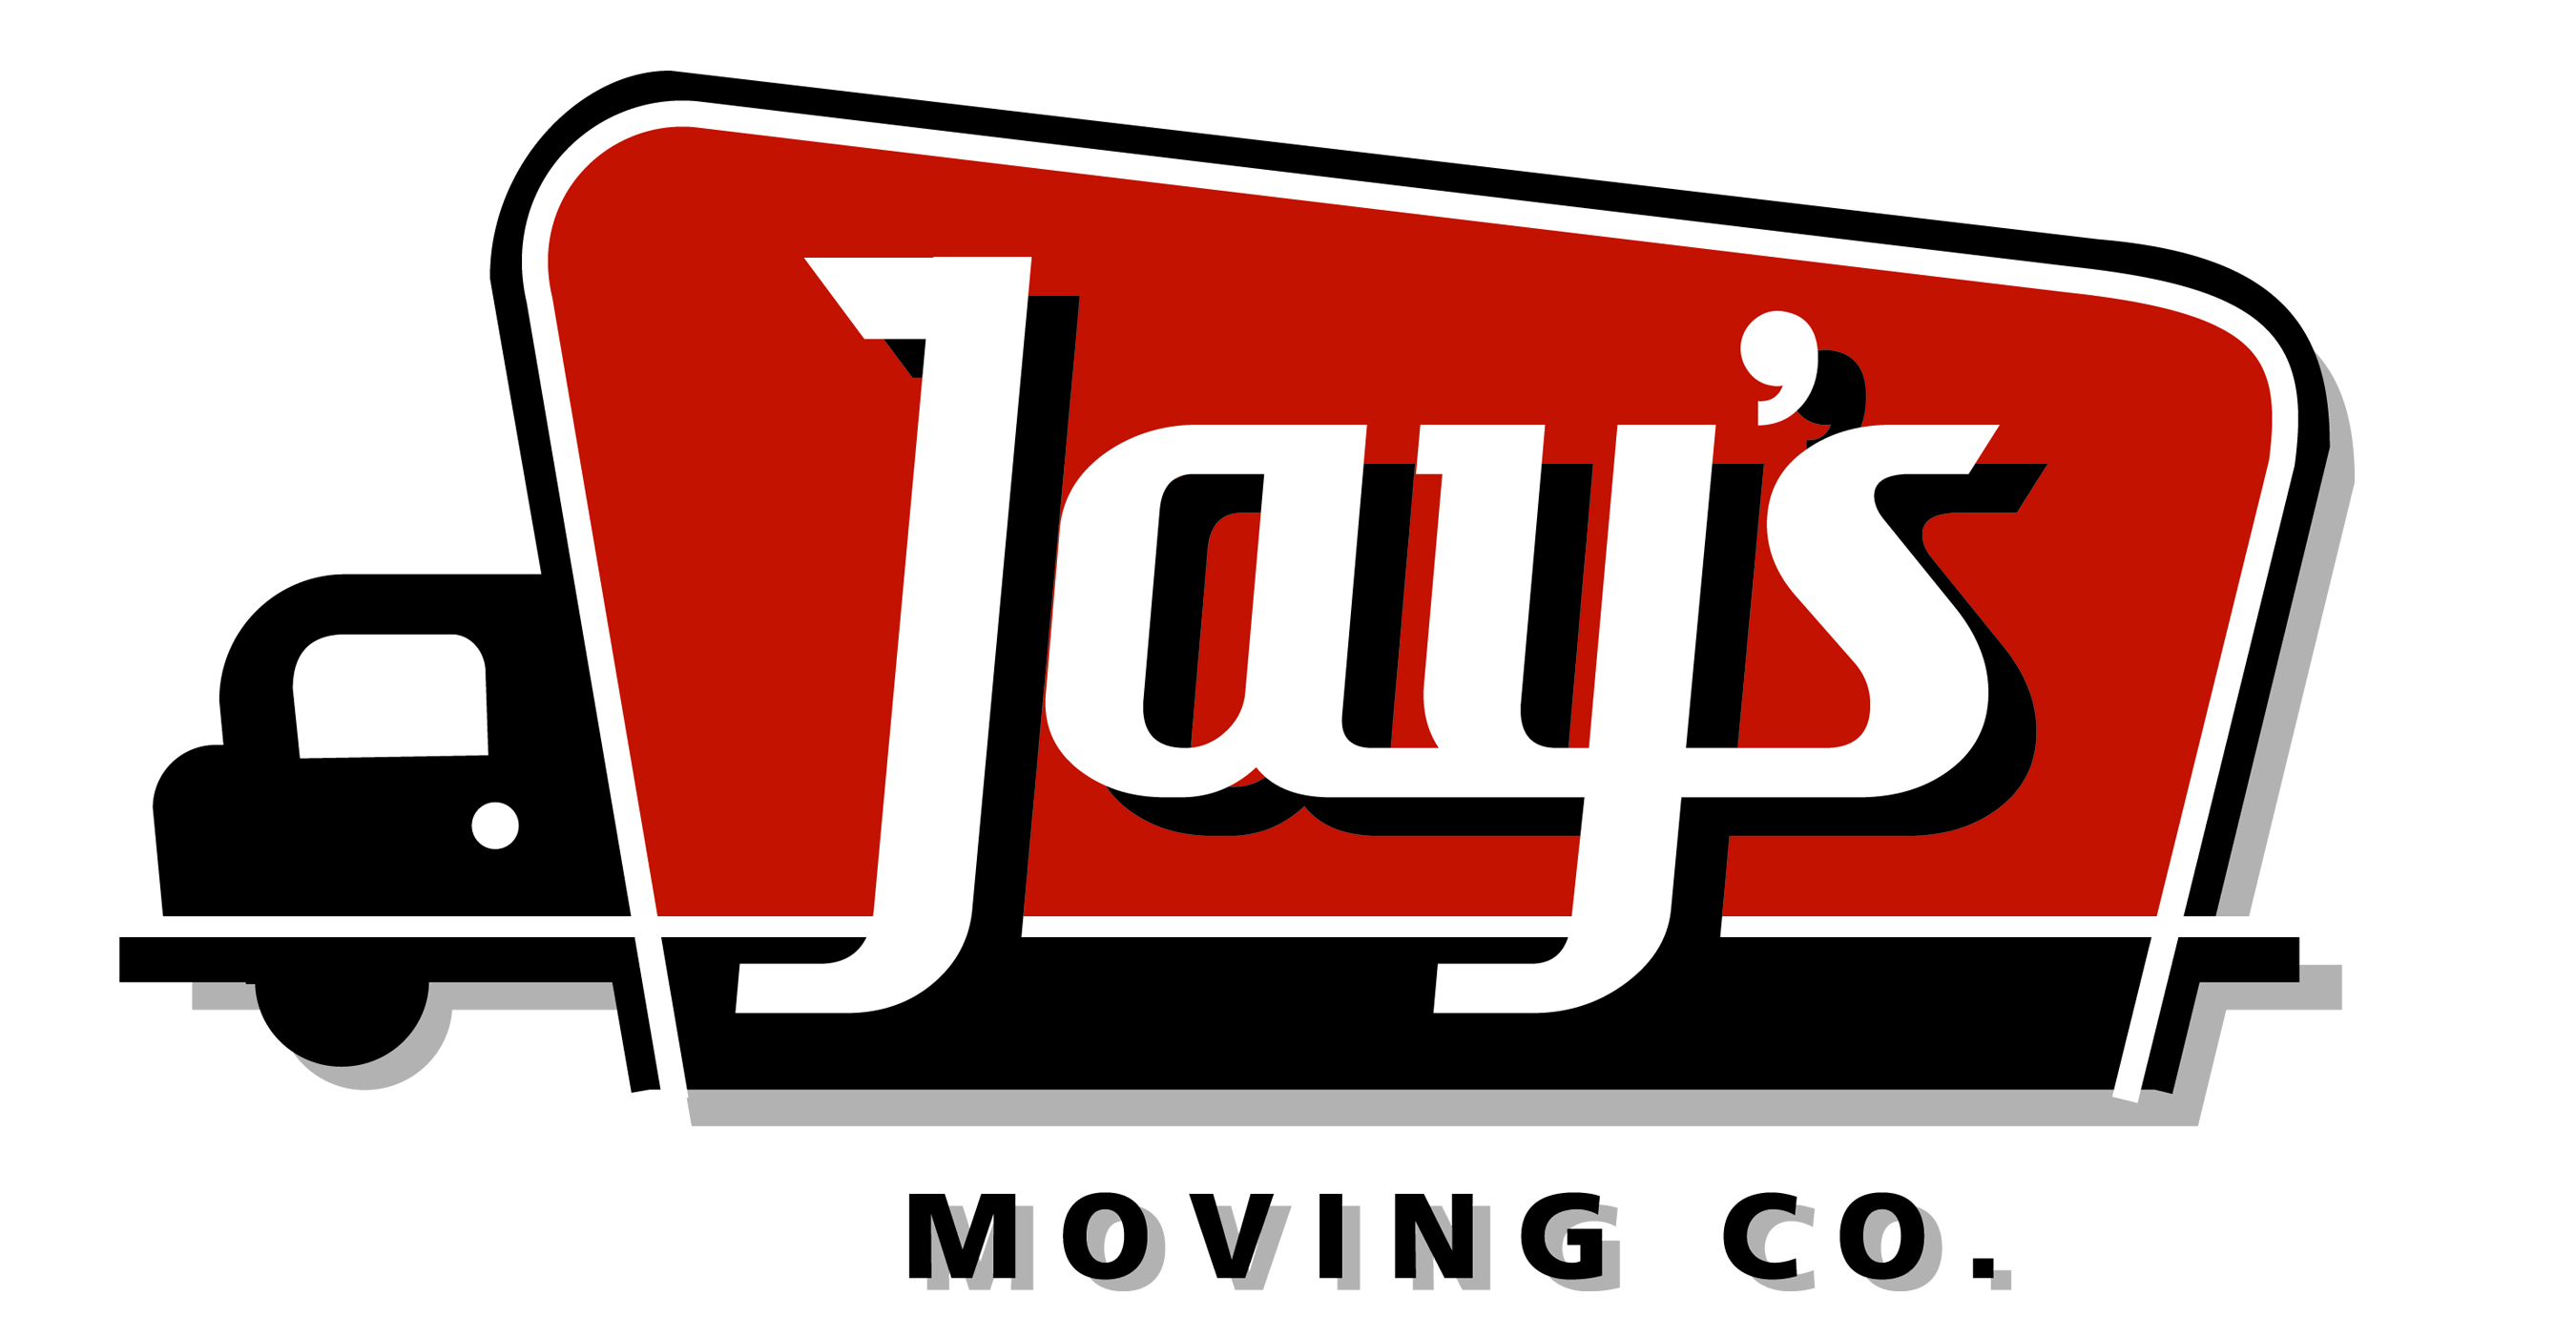 Jay's Moving